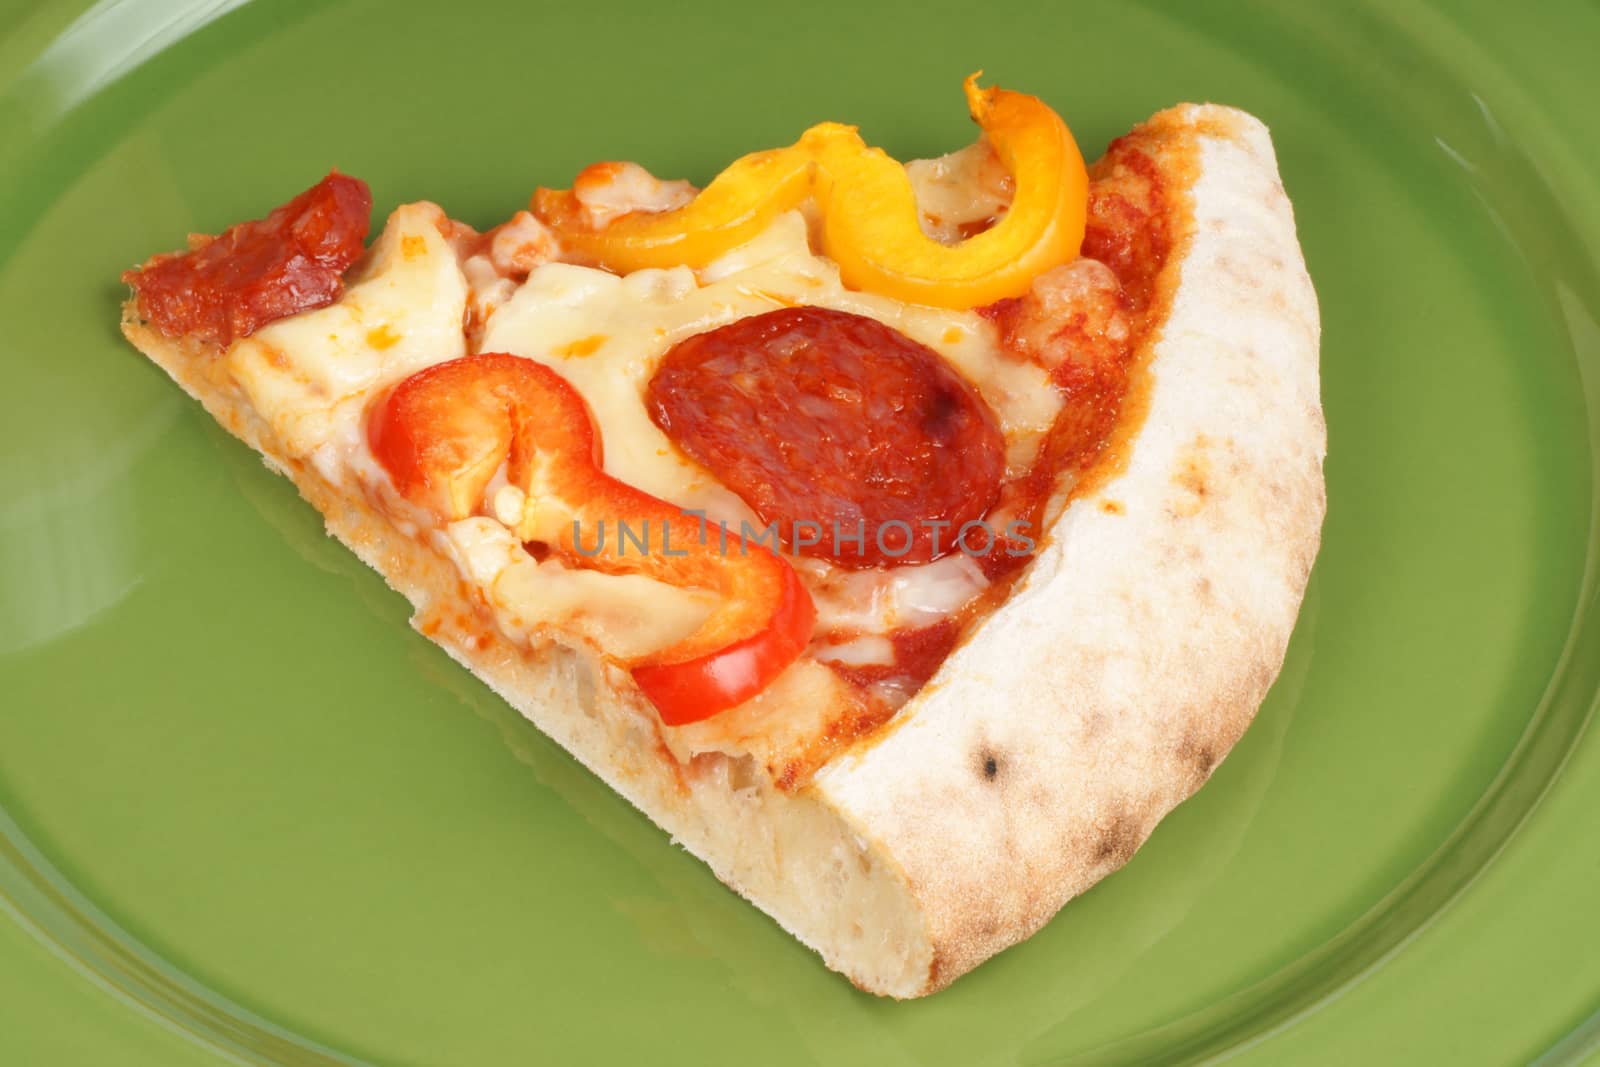 Slice of hot spicy pizza with mozzarella, tomato, salami and bell peppers served on a green dish